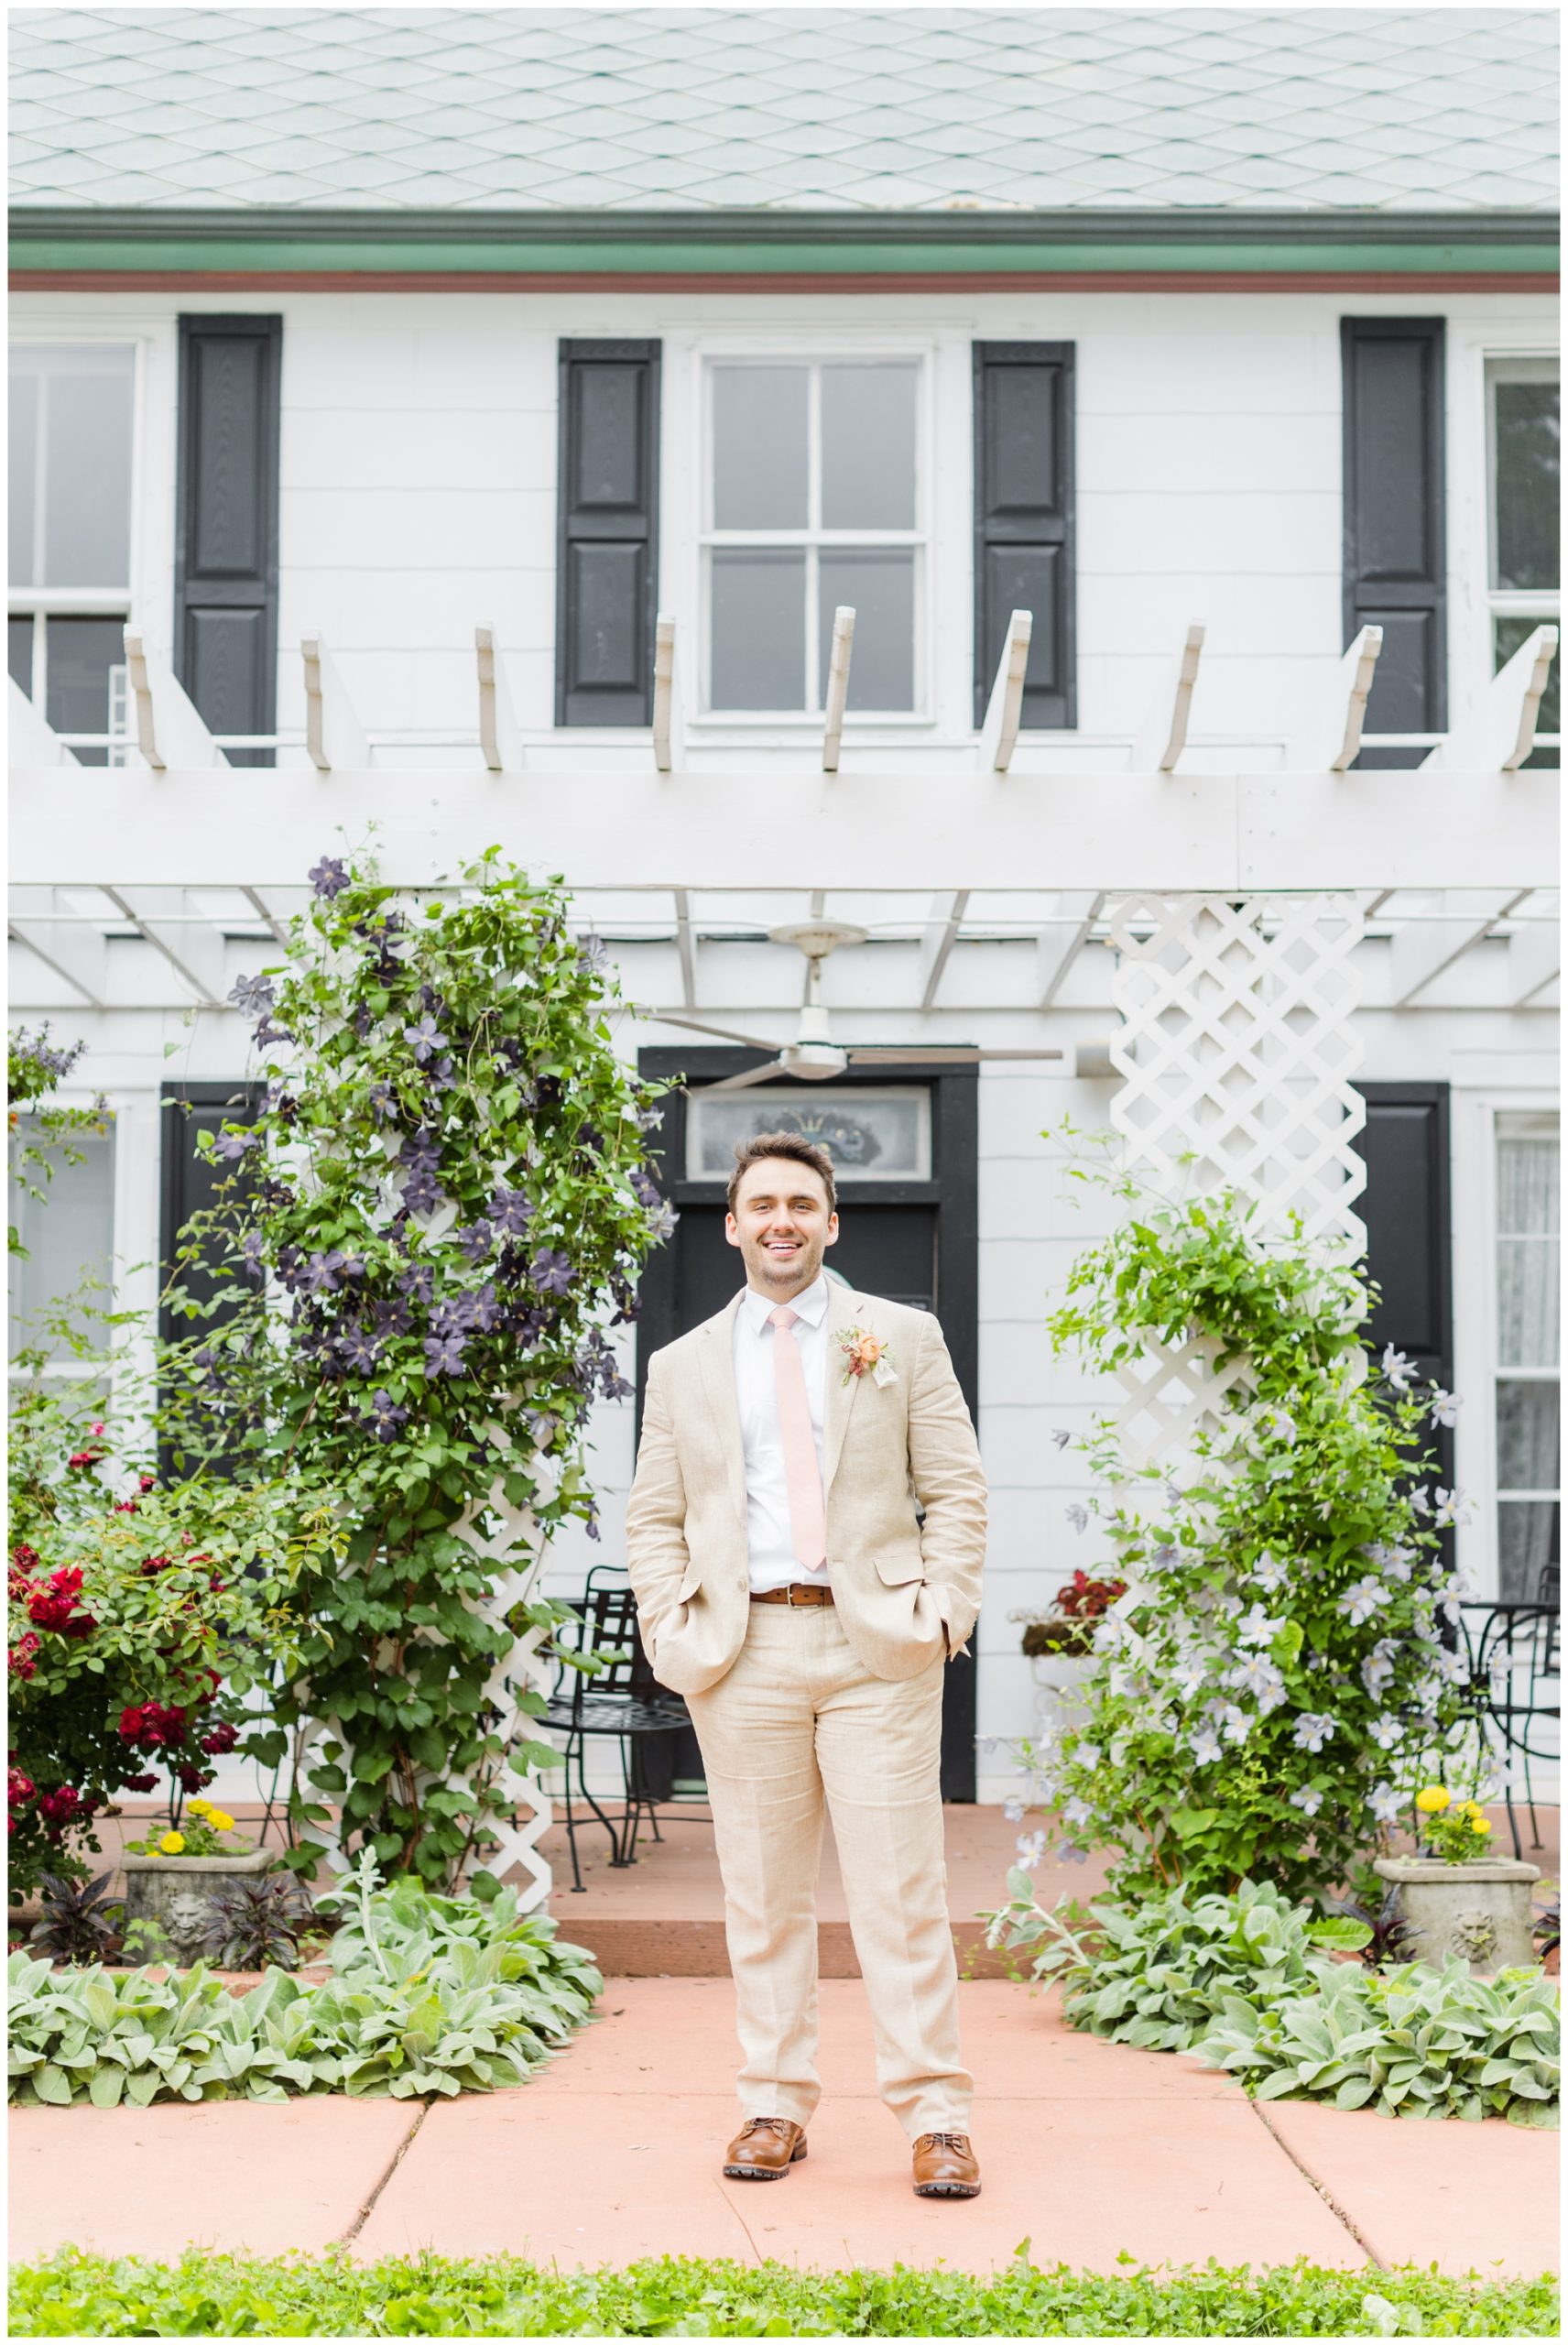 The groom poses in his tan linen suit on an exterior porch at defiance vineyard. He is wearing a pale pink tie with a boutonniere (orange and white flowers plus greenery) tied with a pink ribbon.  